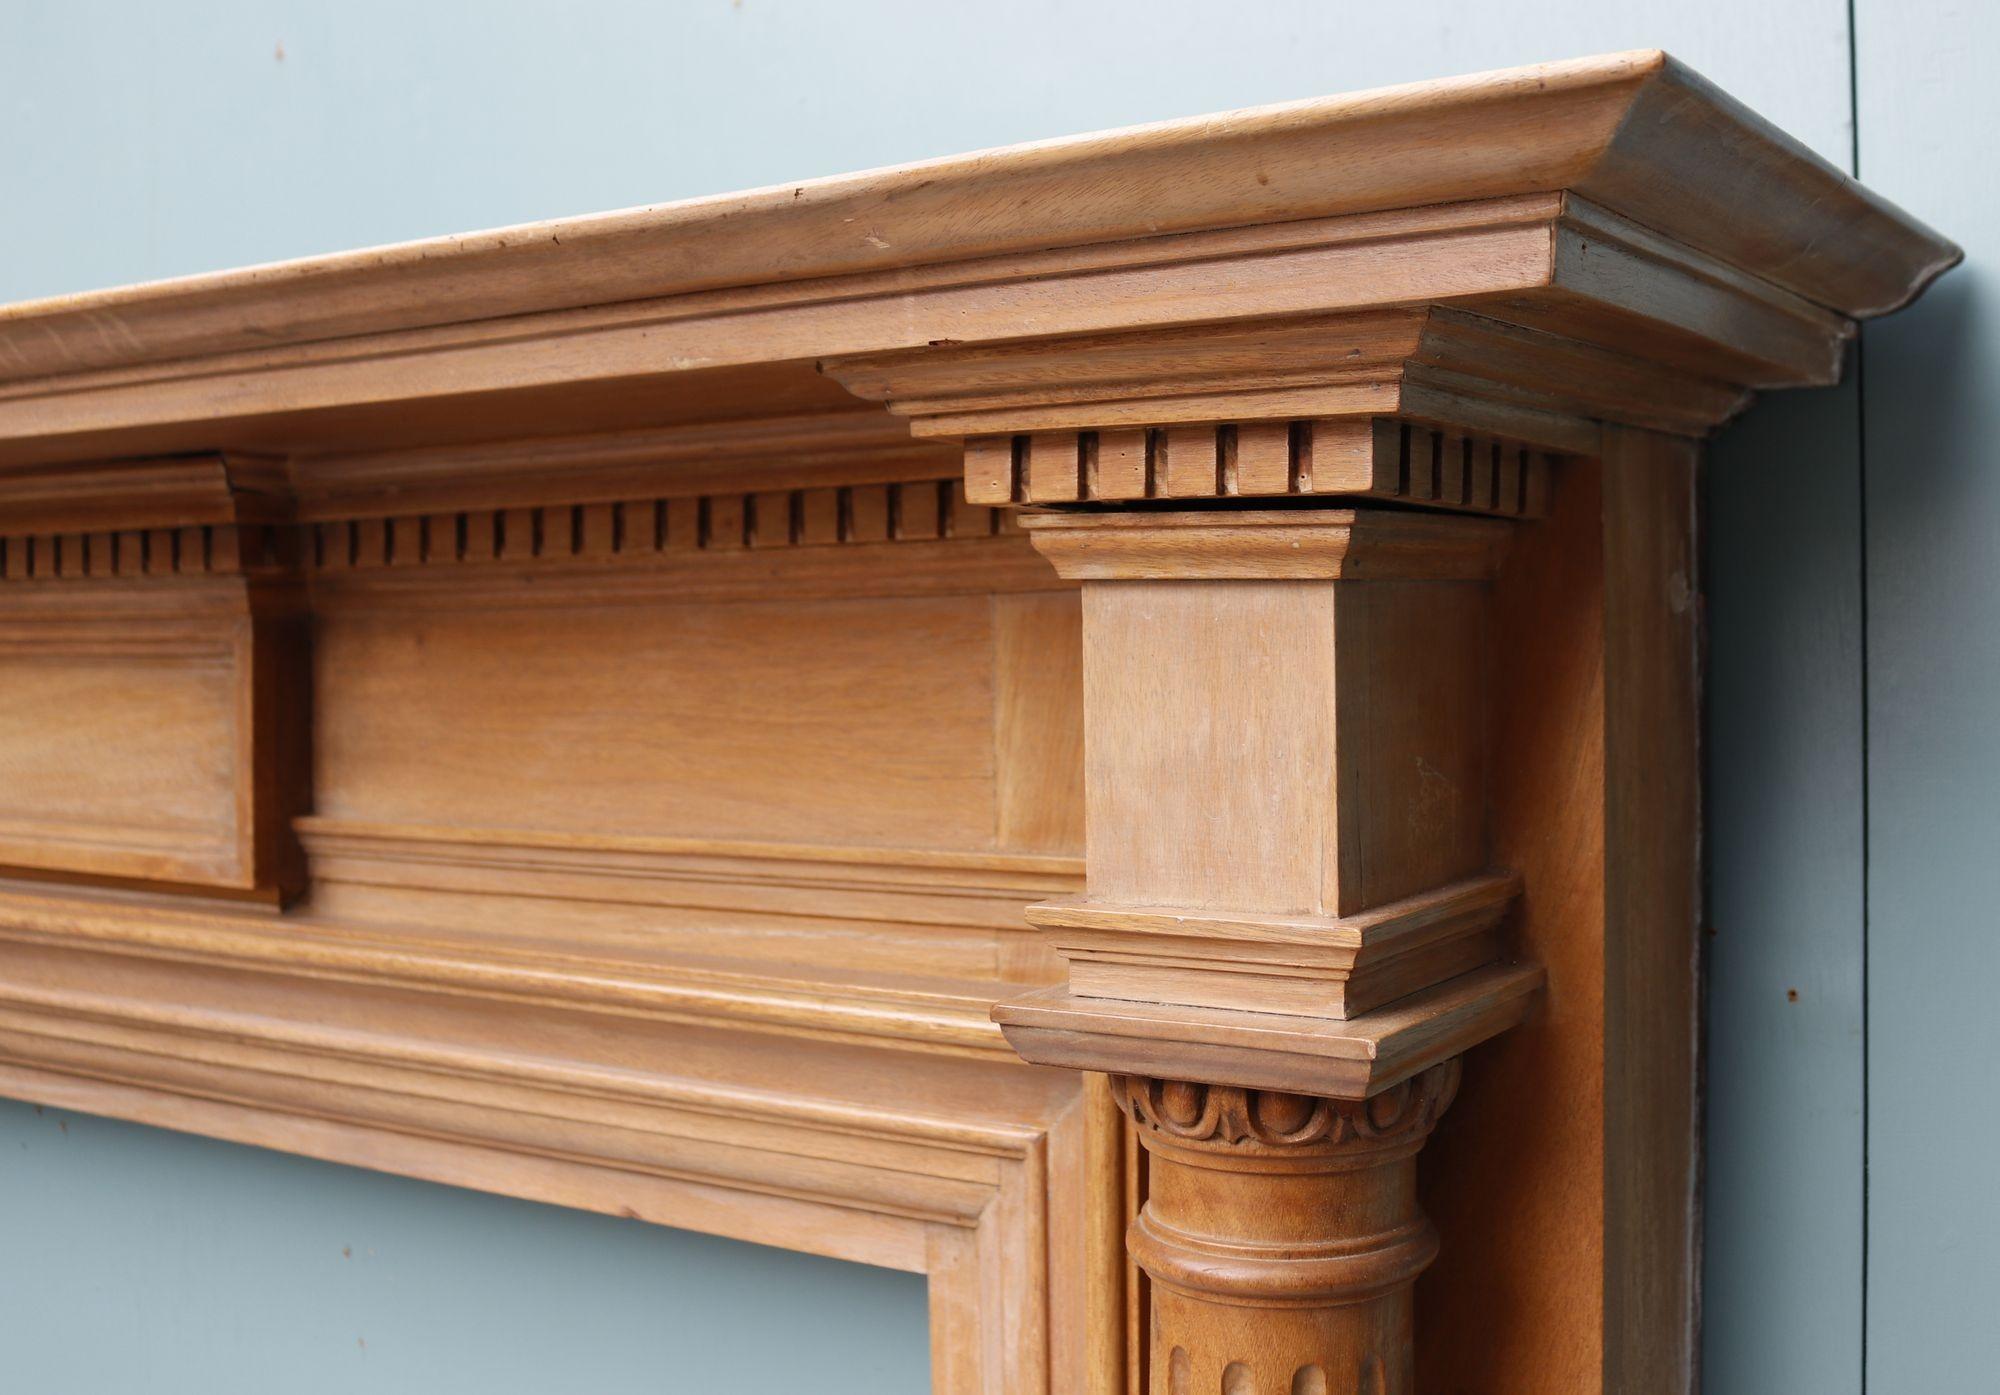 Neoclassical Columned Timber Fireplace. A neoclassical style fireplace with dental carvings along the frieze. There are two columns either side of the jambs which give the piece a grand appearance.
 
Additional Dimensions


Opening height: 100